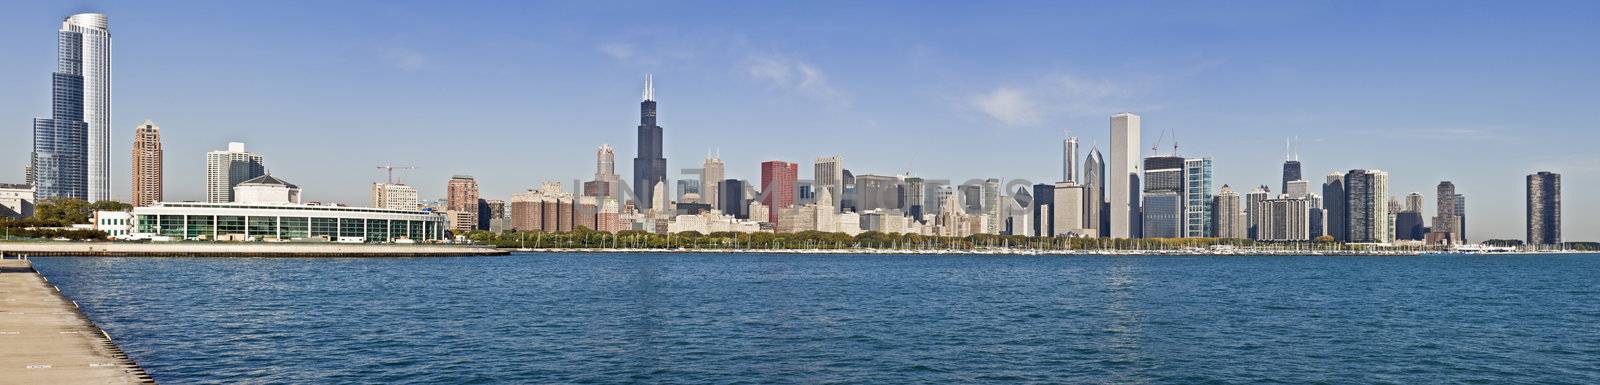 XXXL panorama of Chicago by benkrut